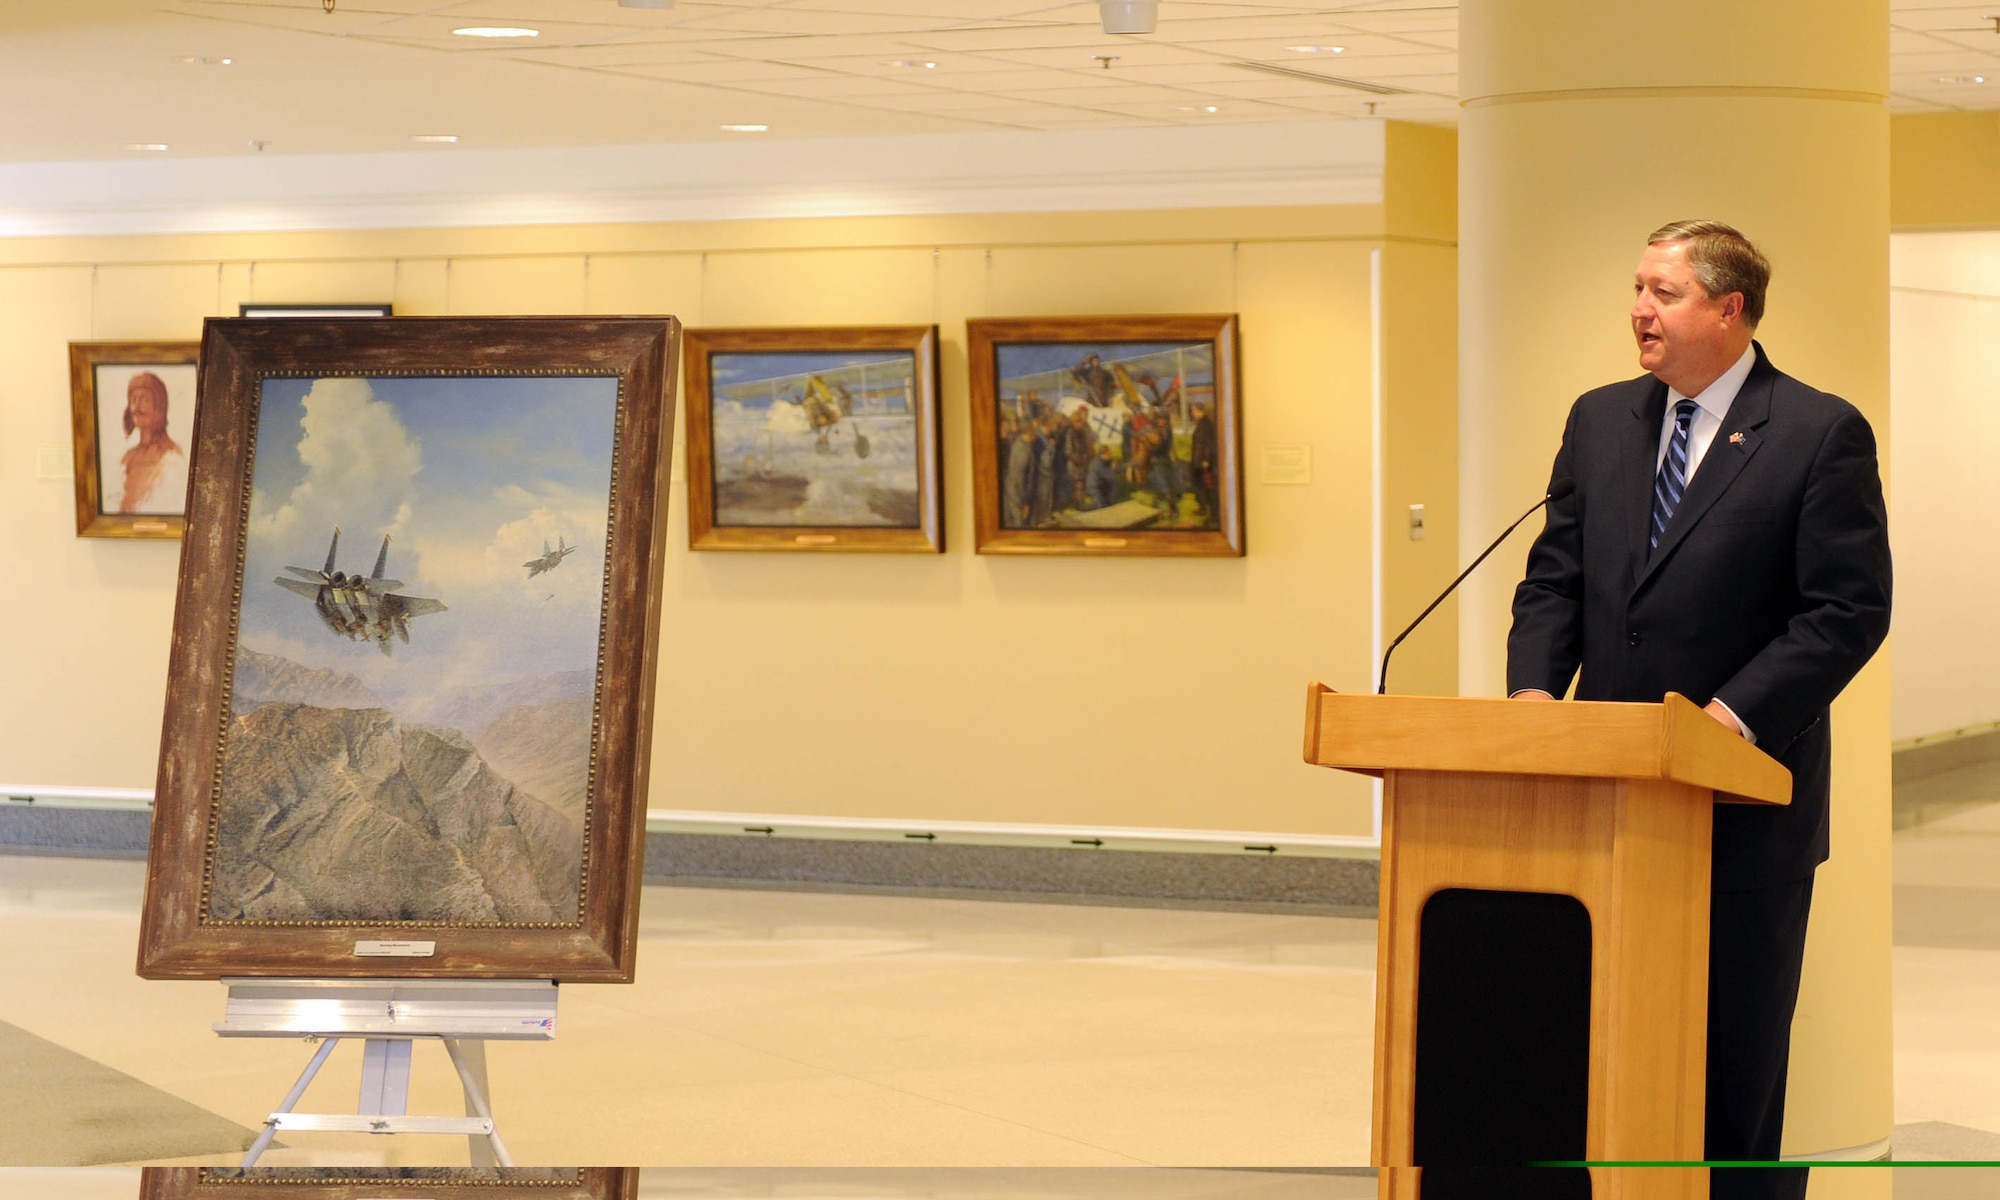 Secretary of the Air Force Michael Donley speaks at the opening of the Air Force Art Gallery in the Pentagon March 18, 2010.  The gallery is located at the fifth-floor apex of corridors 9 and 10 in the Pentagon. The opening featured paintings by the first aviation artist, France's Henri Farre, and the latest addition, "Moving Mountains" by William Phillips, depicting two F-15 Eagles on a combat mission over Afghanistan. (U.S. Air Force photo/Andy Morataya)